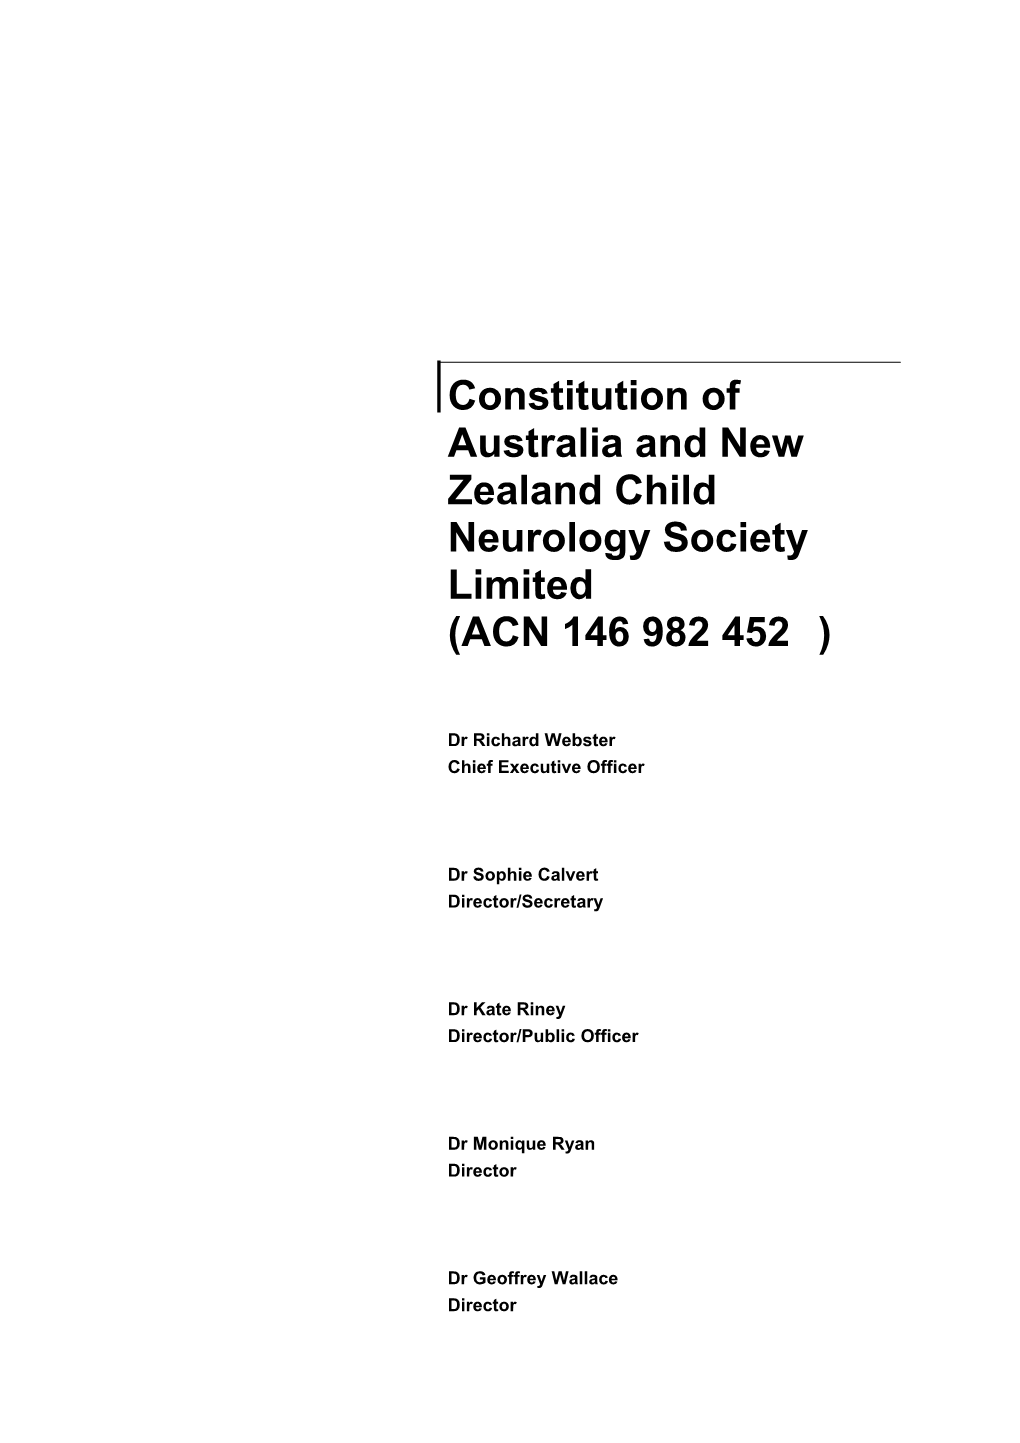 Constitution of Australian and New Zealand Child Neurology Society Limited